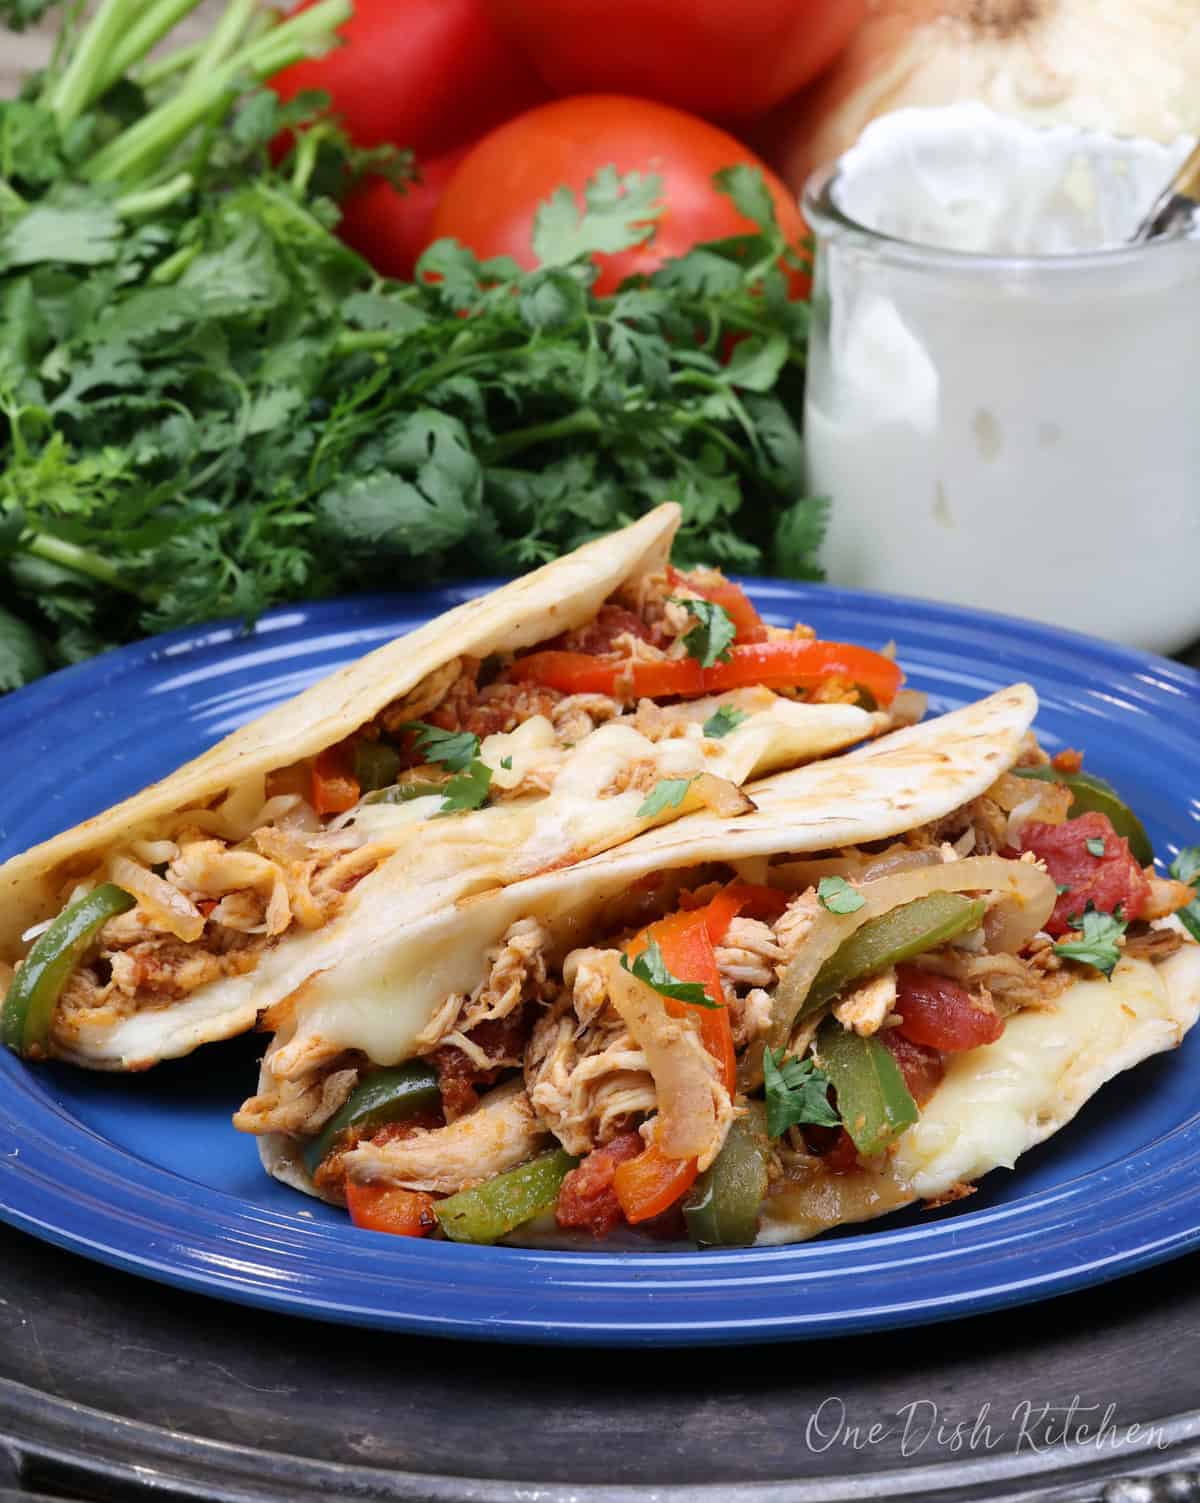 Two chicken tacos on a blue plate surrounded by cilantro, tomatoes, and a jar of sour cream.